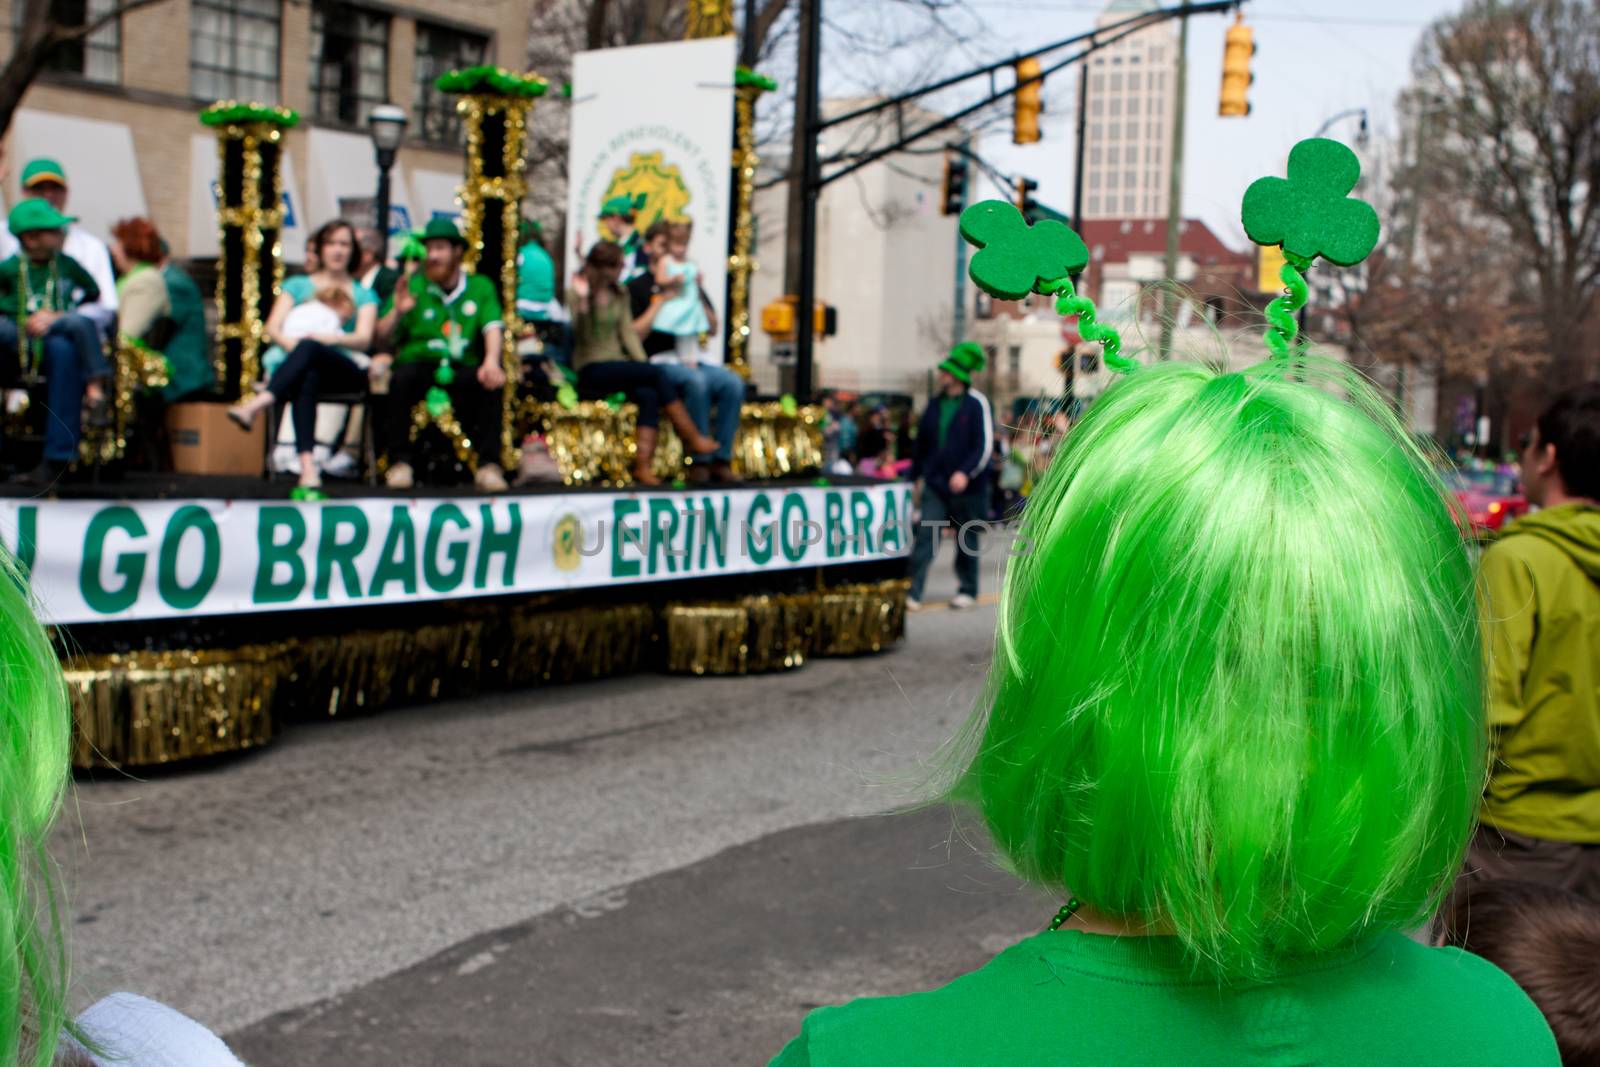 Woman In Green Wig Watches St. Patrick's Parade by BluIz60